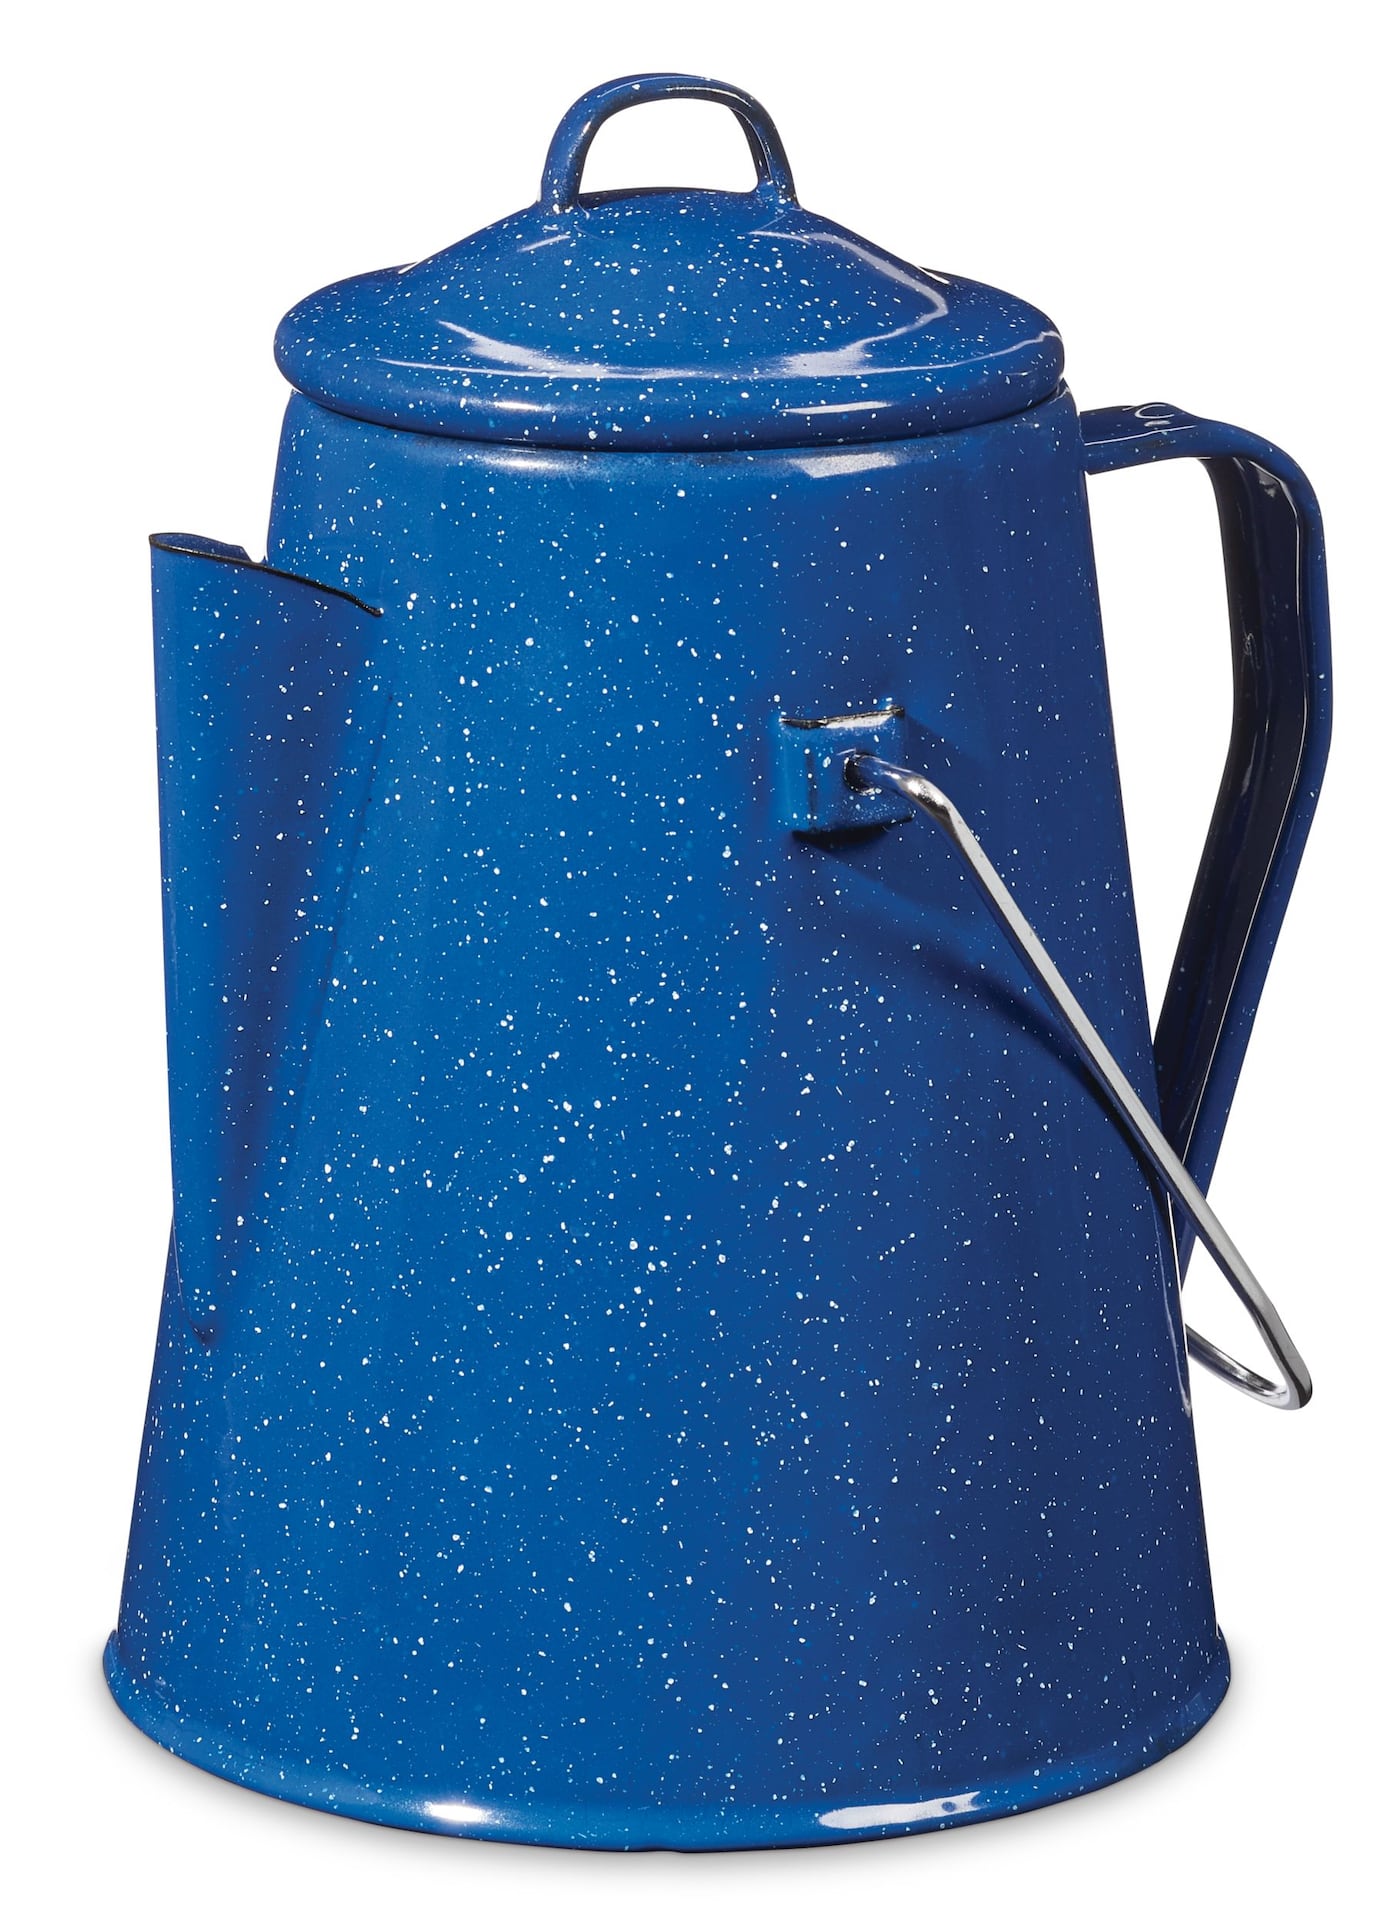 https://media-www.canadiantire.ca/product/playing/camping/camping-living/0765772/woods-9-cup-coffee-pot-enamel-9604ed73-f36a-4fe9-8d3e-722c8ff64f1f-jpgrendition.jpg